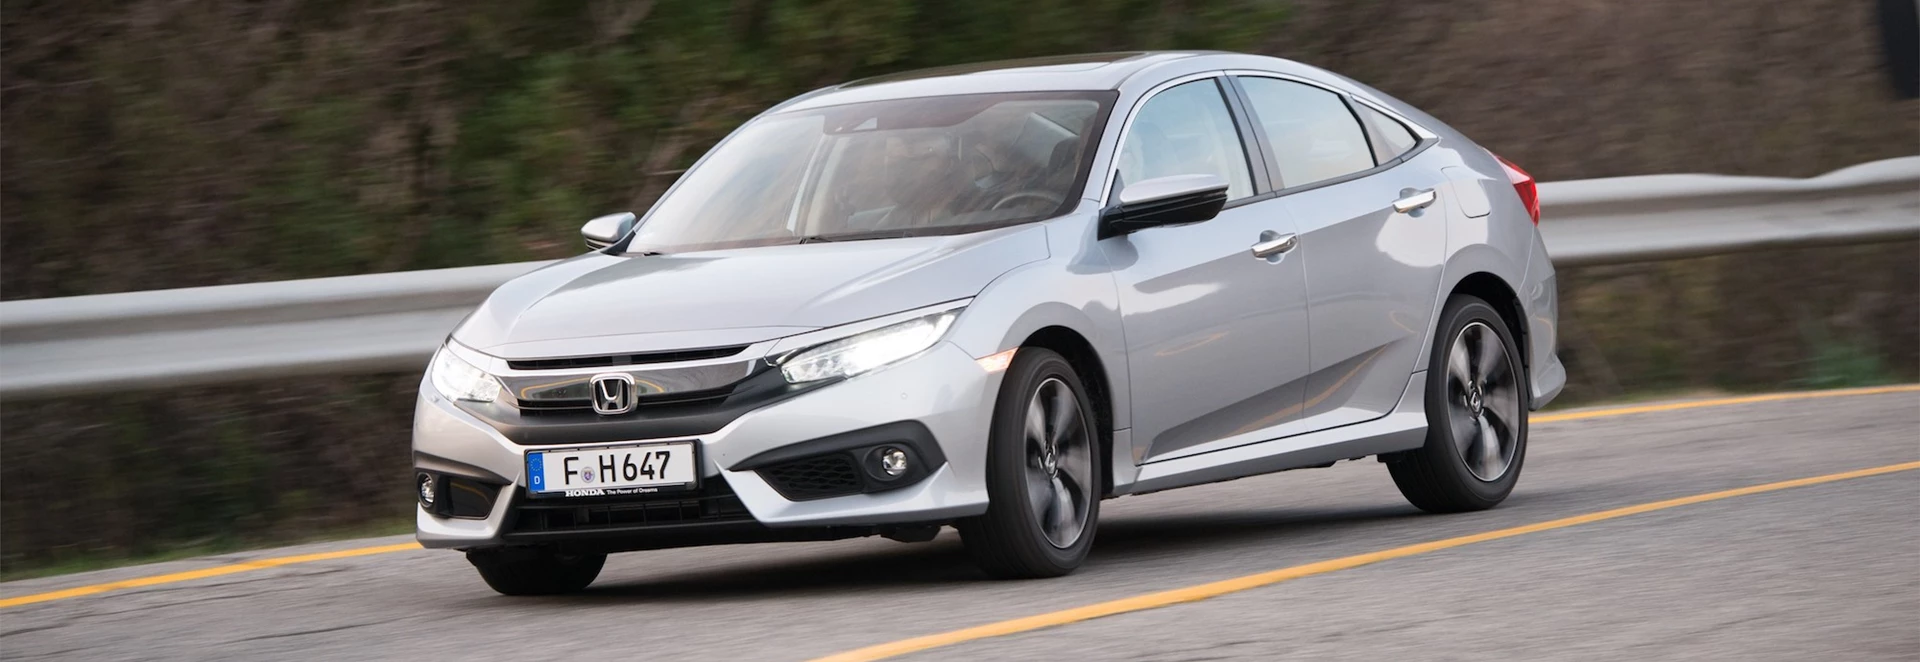 New Honda Civic 2018 - Pricing and spec revealed 